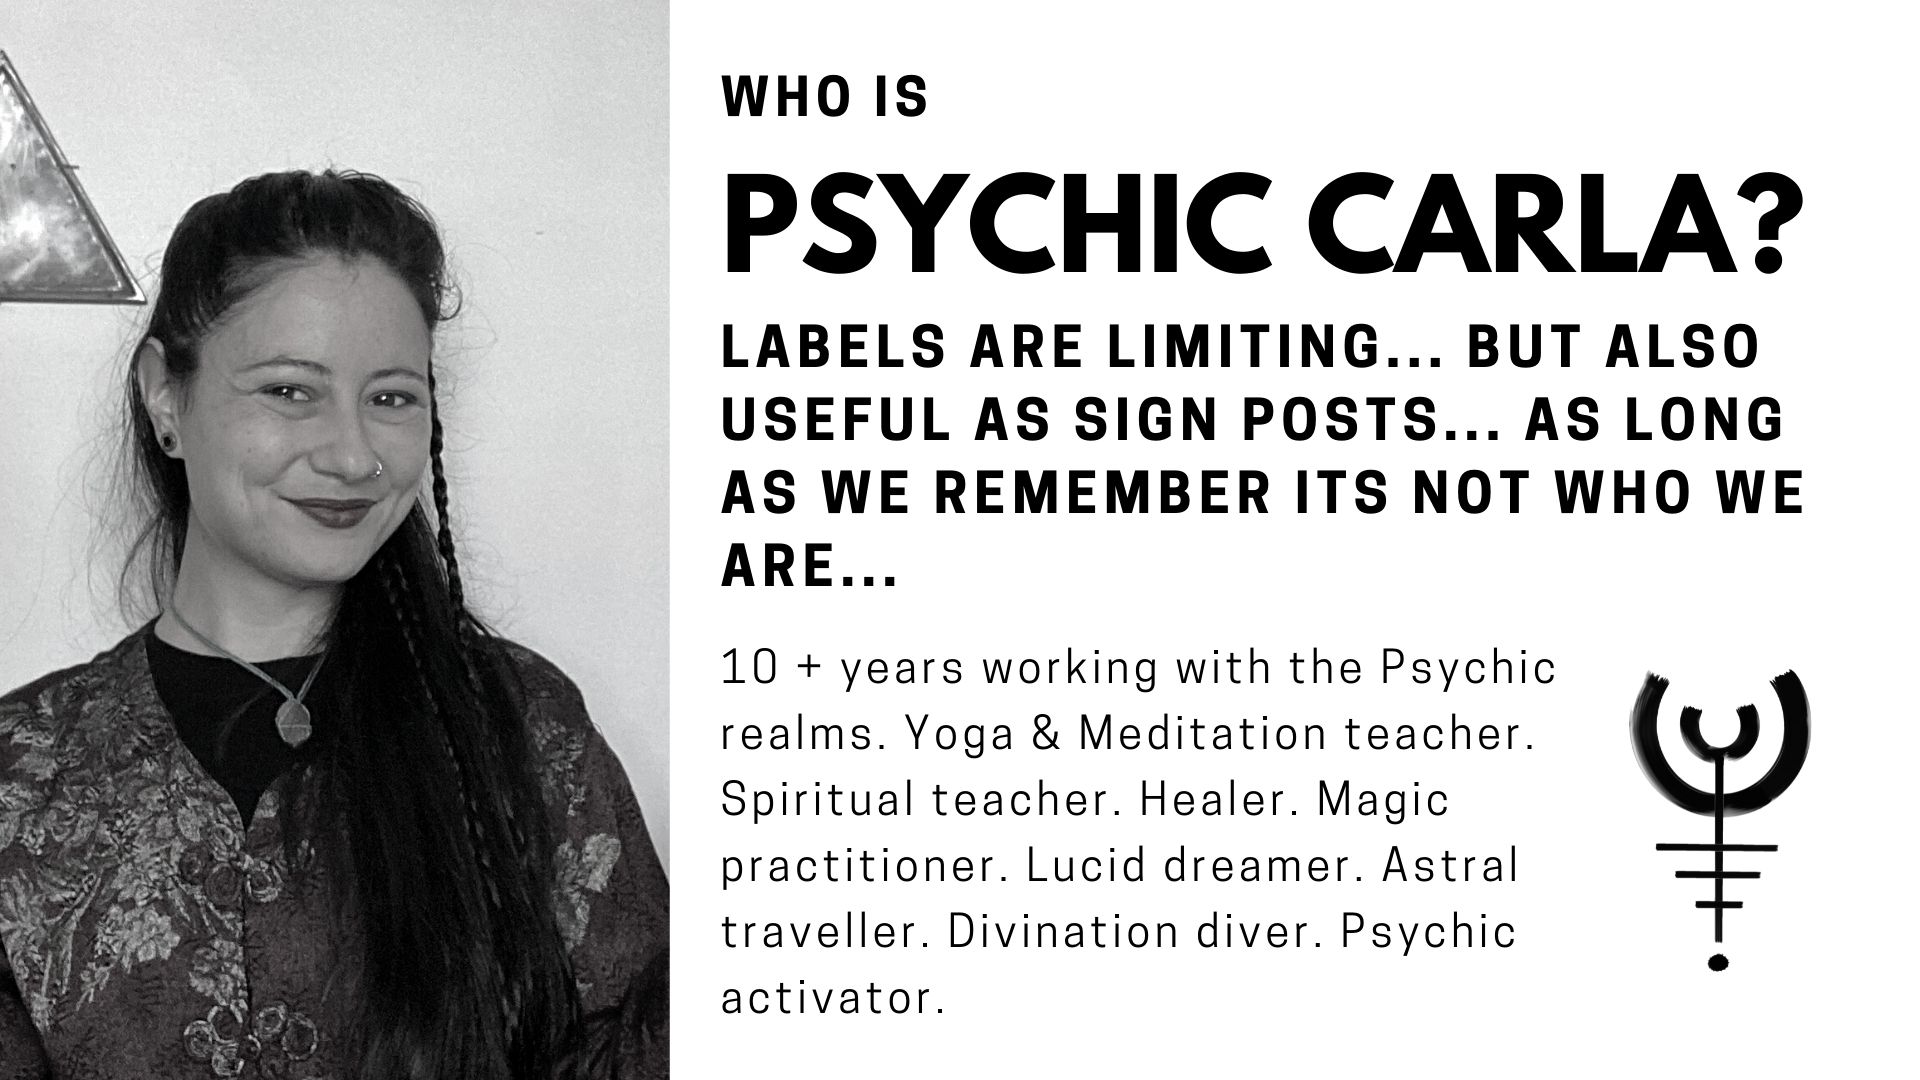 Who is Psychic Carla? labels are limiting... but also useful as sign posts... as long as we remember its not who we are...10 + years working with the Psychic realms. Yoga & Meditation teacher. Spiritual teacher. Healer. Magic practitioner. Lucid dreamer. Astral traveller. Divination diver. Psychic activator.